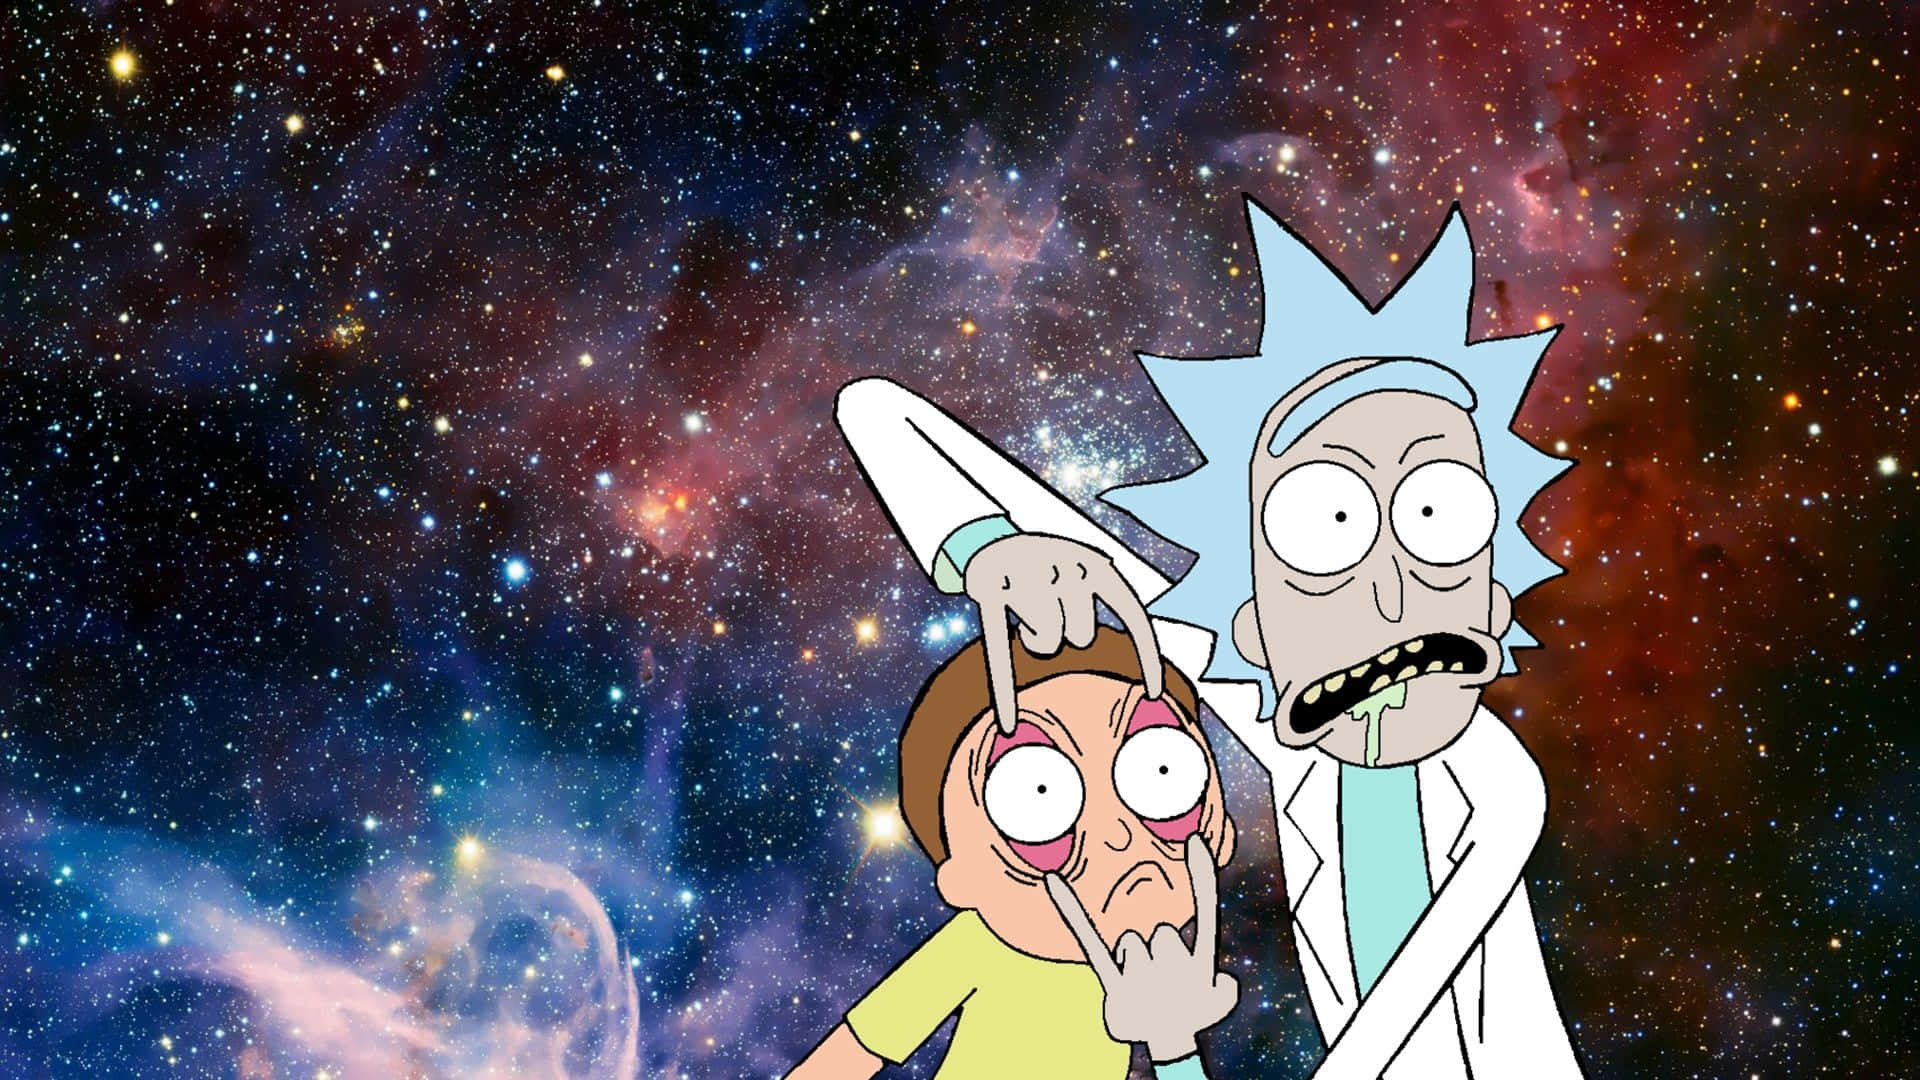 "An Interdimensional Adventure with Rick and Morty" Wallpaper